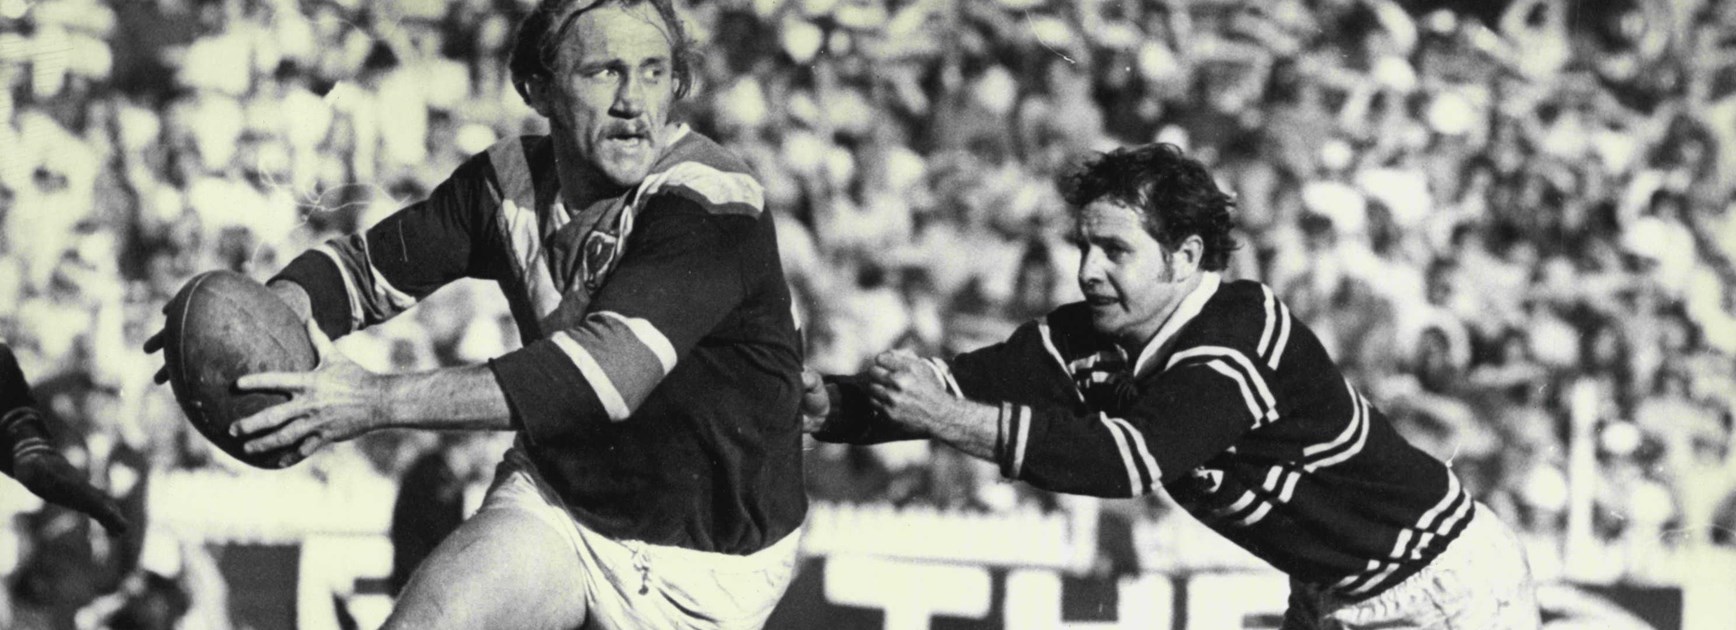 1972 grand final rewind: Sixth time lucky for drought-breaking Sea Eagles